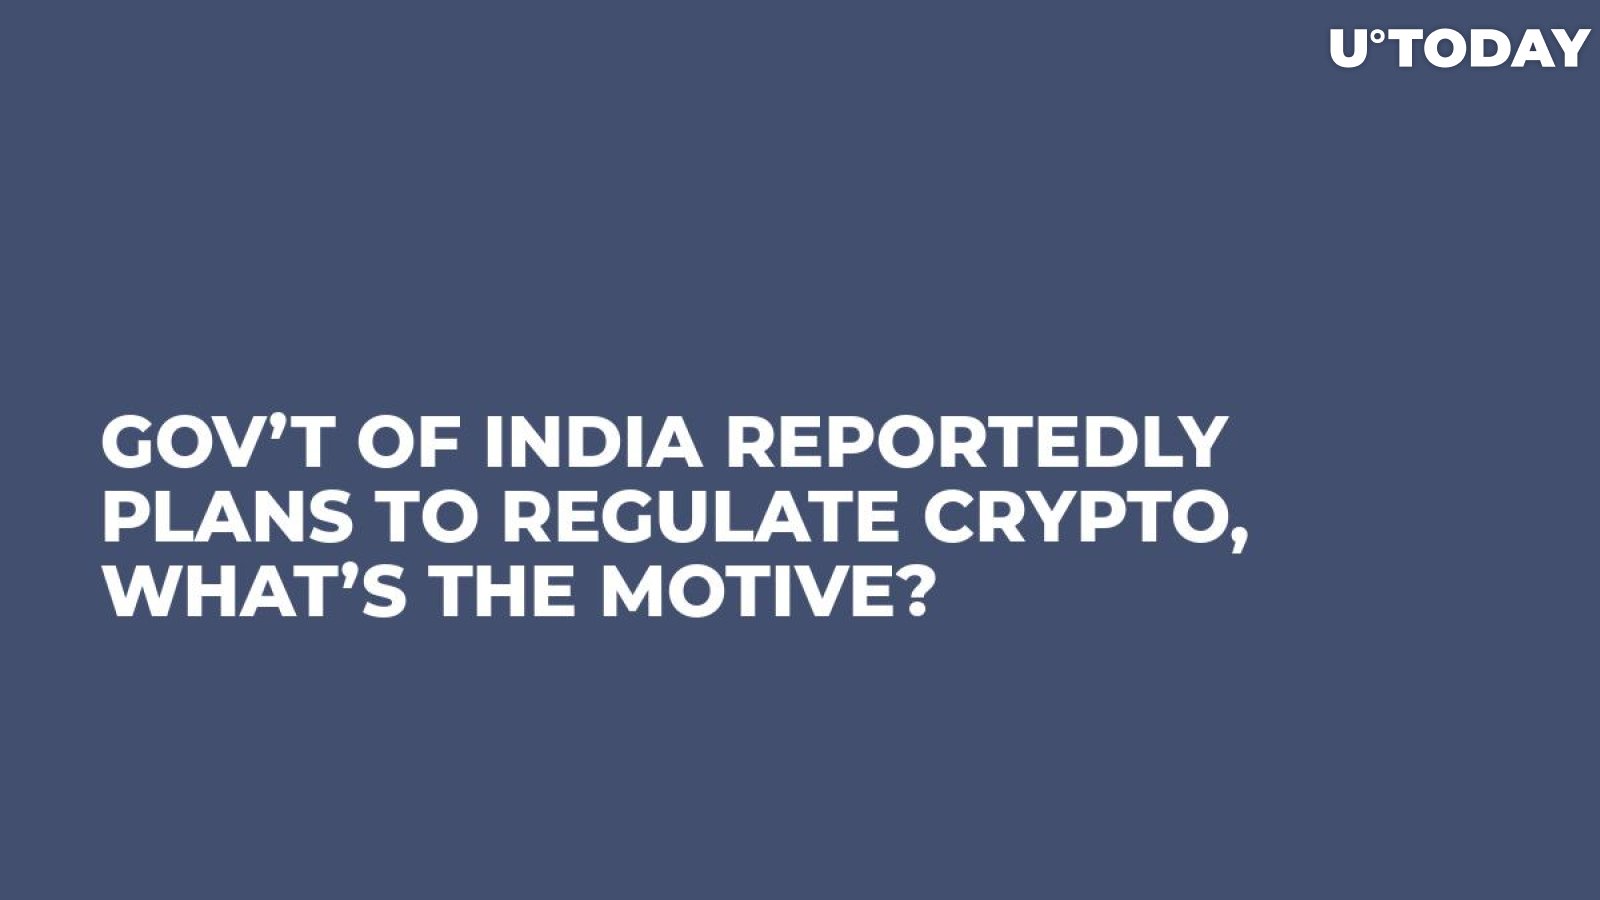 Gov’t of India Reportedly Plans to Regulate Crypto, What’s the Motive?